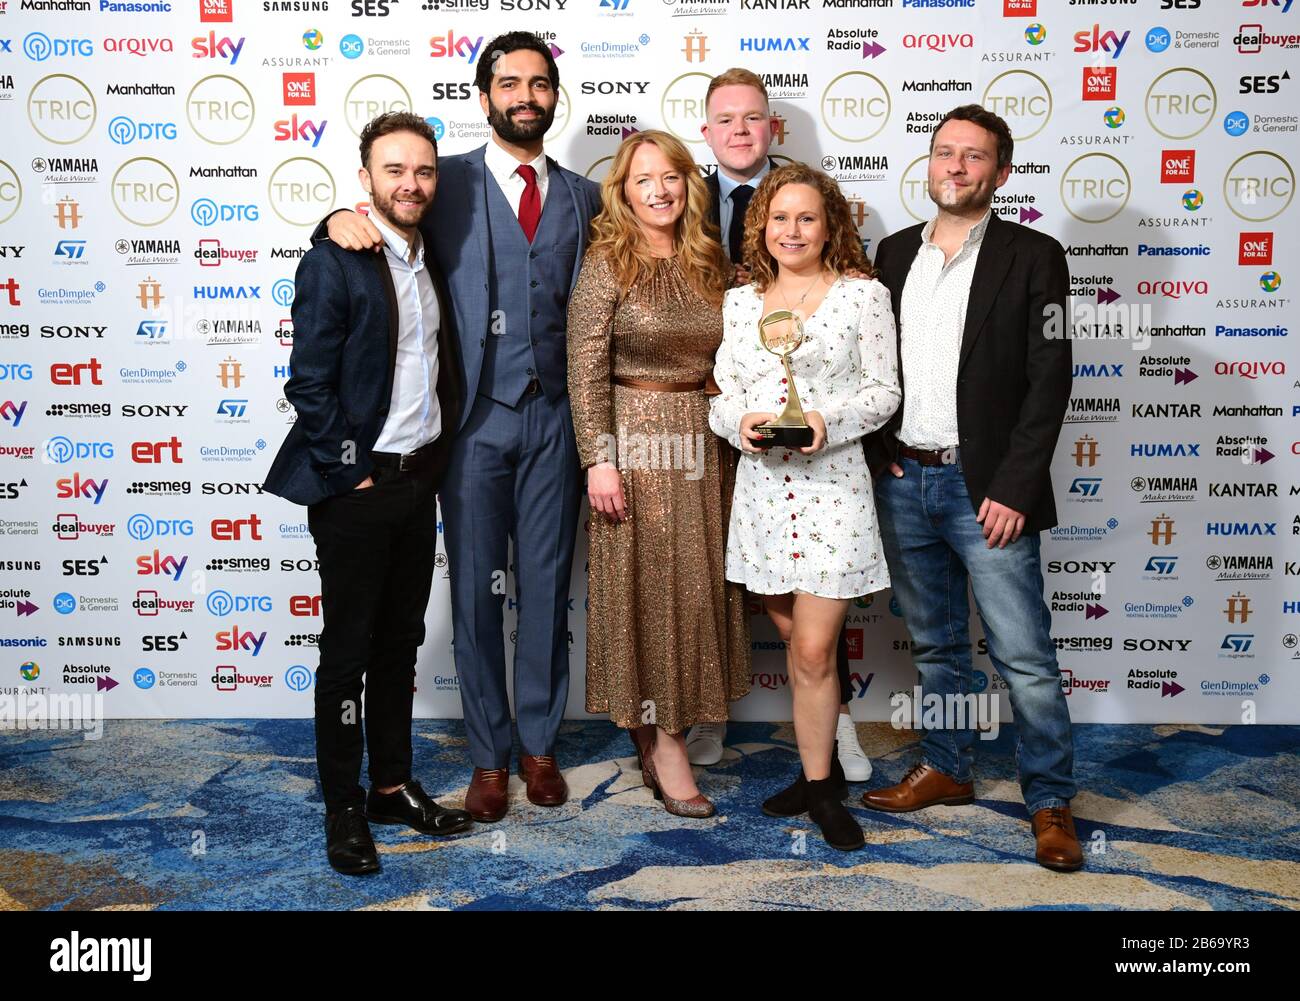 The cast of Coronation Street with the award for Soap of the Year Sponsored by Assurant. Jack P. Shepherd, Charlie De Melo, Sally Ann Matthews, Dolly-Rose Campbell, Colson Smith and Peter Ash (left to right) attending the TRIC Awards 2020 held at the Grosvenor Hotel, London. Stock Photo